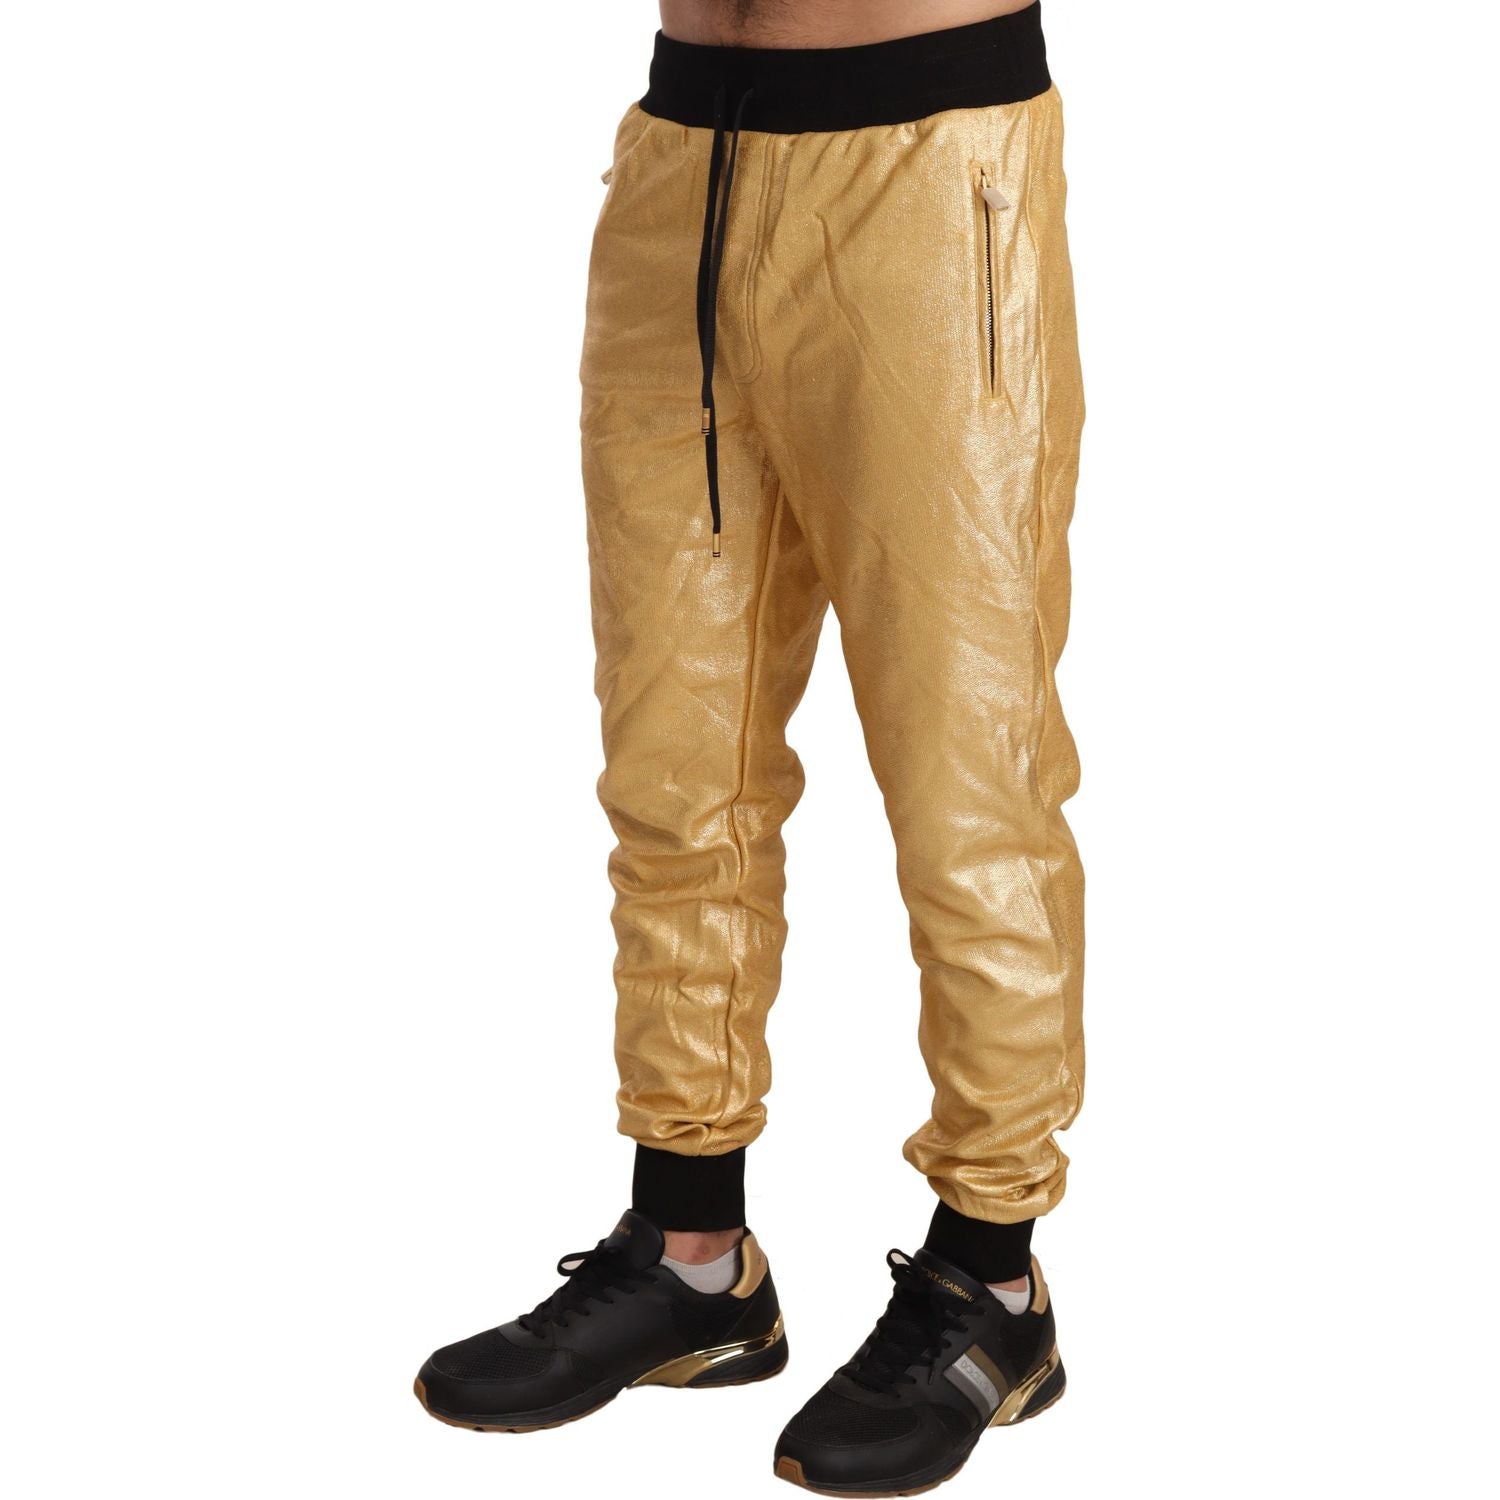 Dolce & Gabbana | Gold Pig Of The Year Cotton Trousers Pants | McRichard Designer Brands